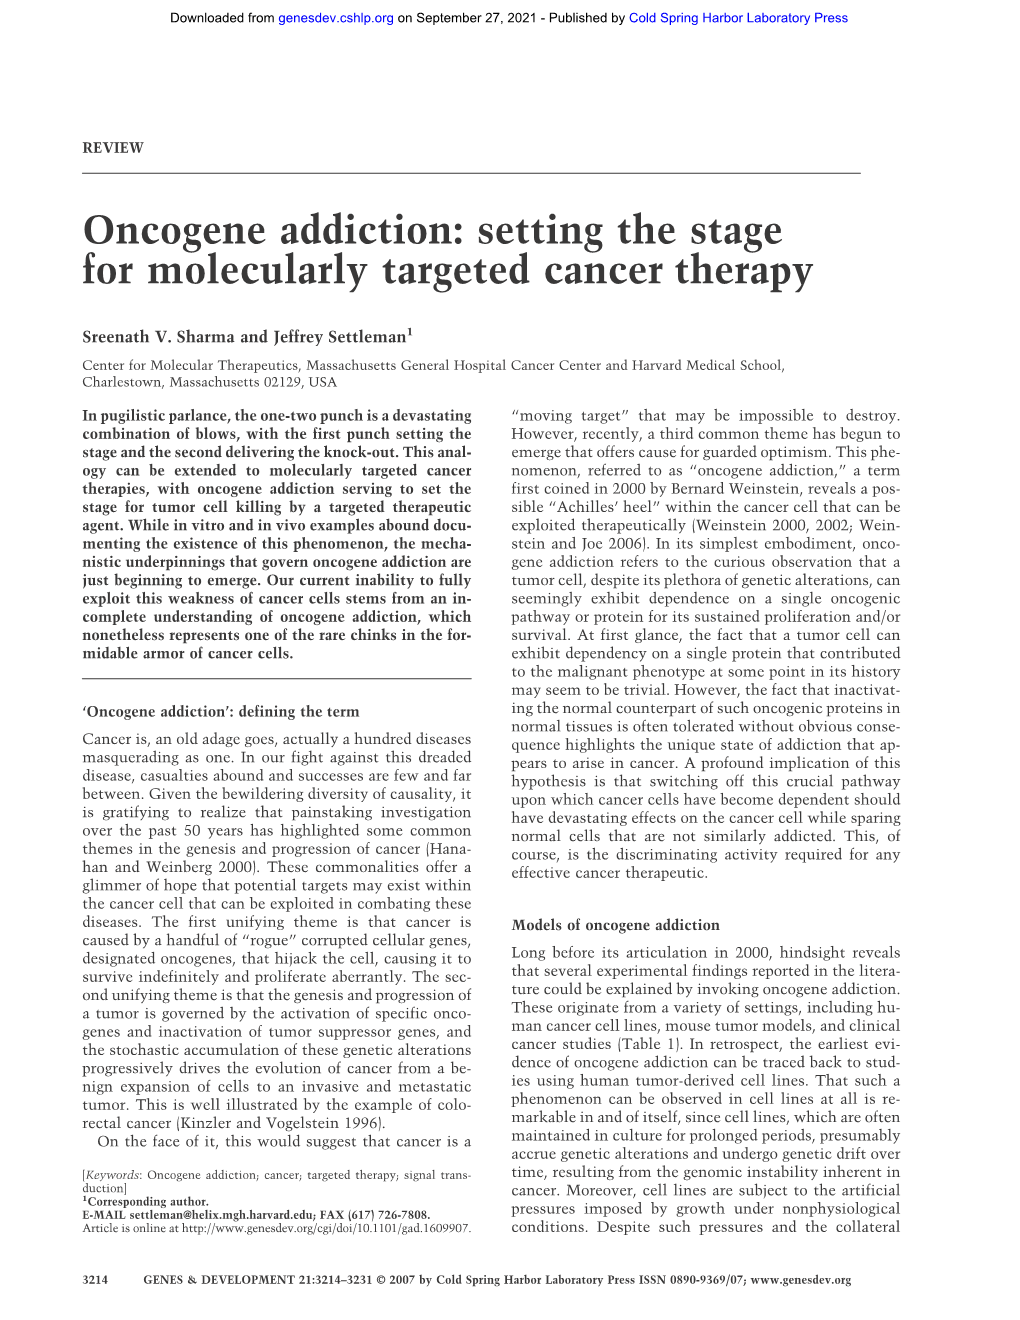 Oncogene Addiction: Setting the Stage for Molecularly Targeted Cancer Therapy